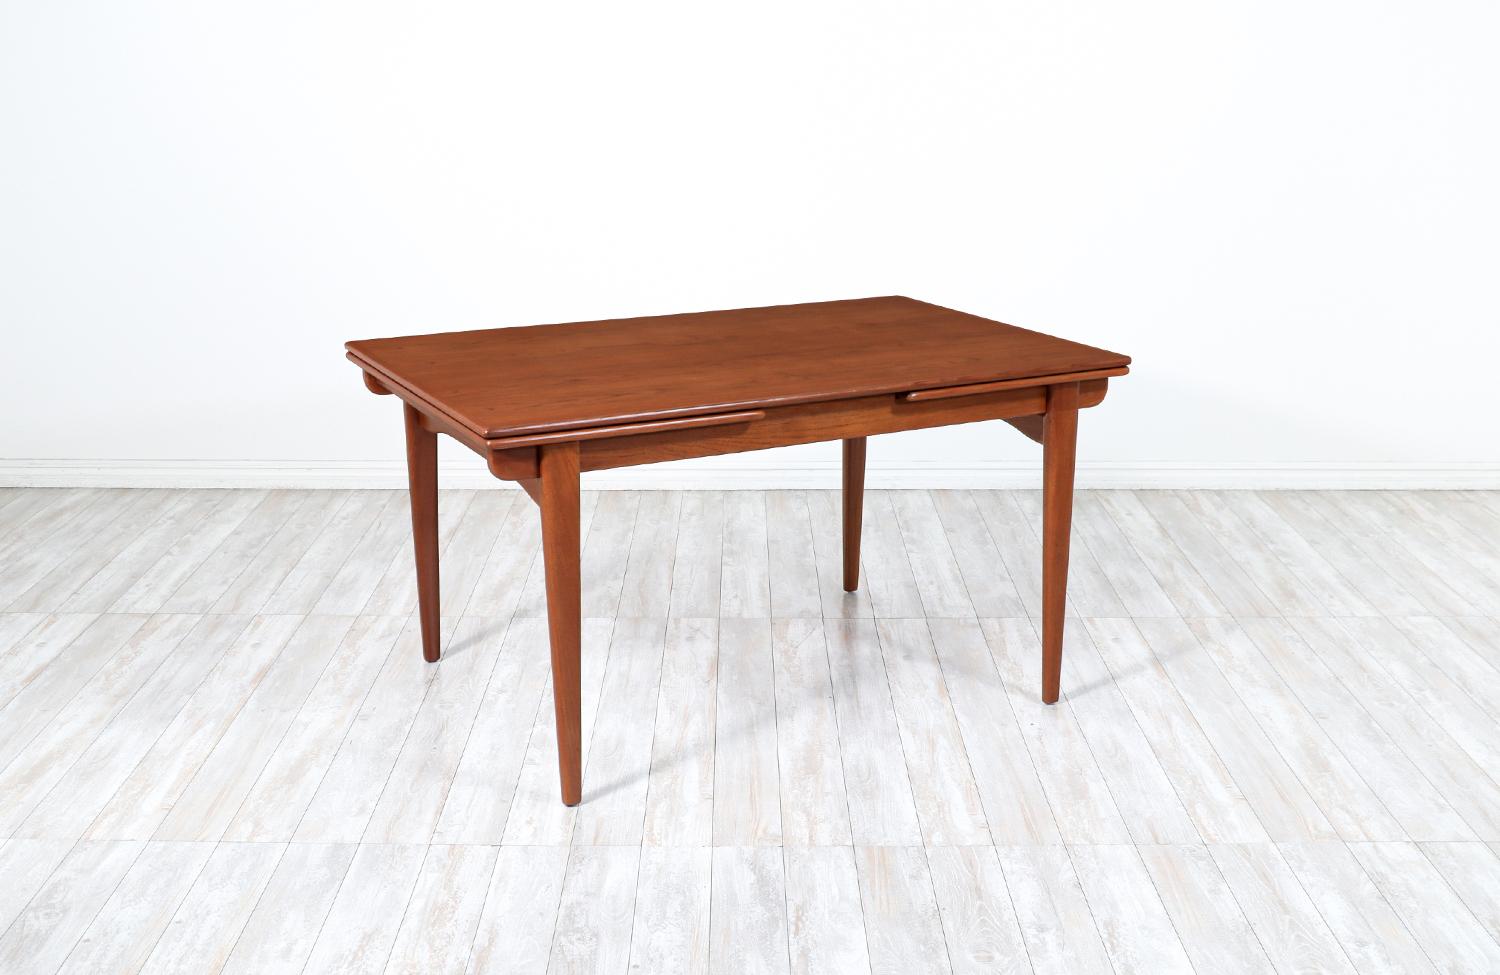 Stylish Danish Modern draw-leaf dining table by Danish furniture designer Johannes Andersen and manufactured by the workshop of Uldum Møbelfabrik, circa 1960s. This versatile table design features a solid teak wood body with a rectangular top and